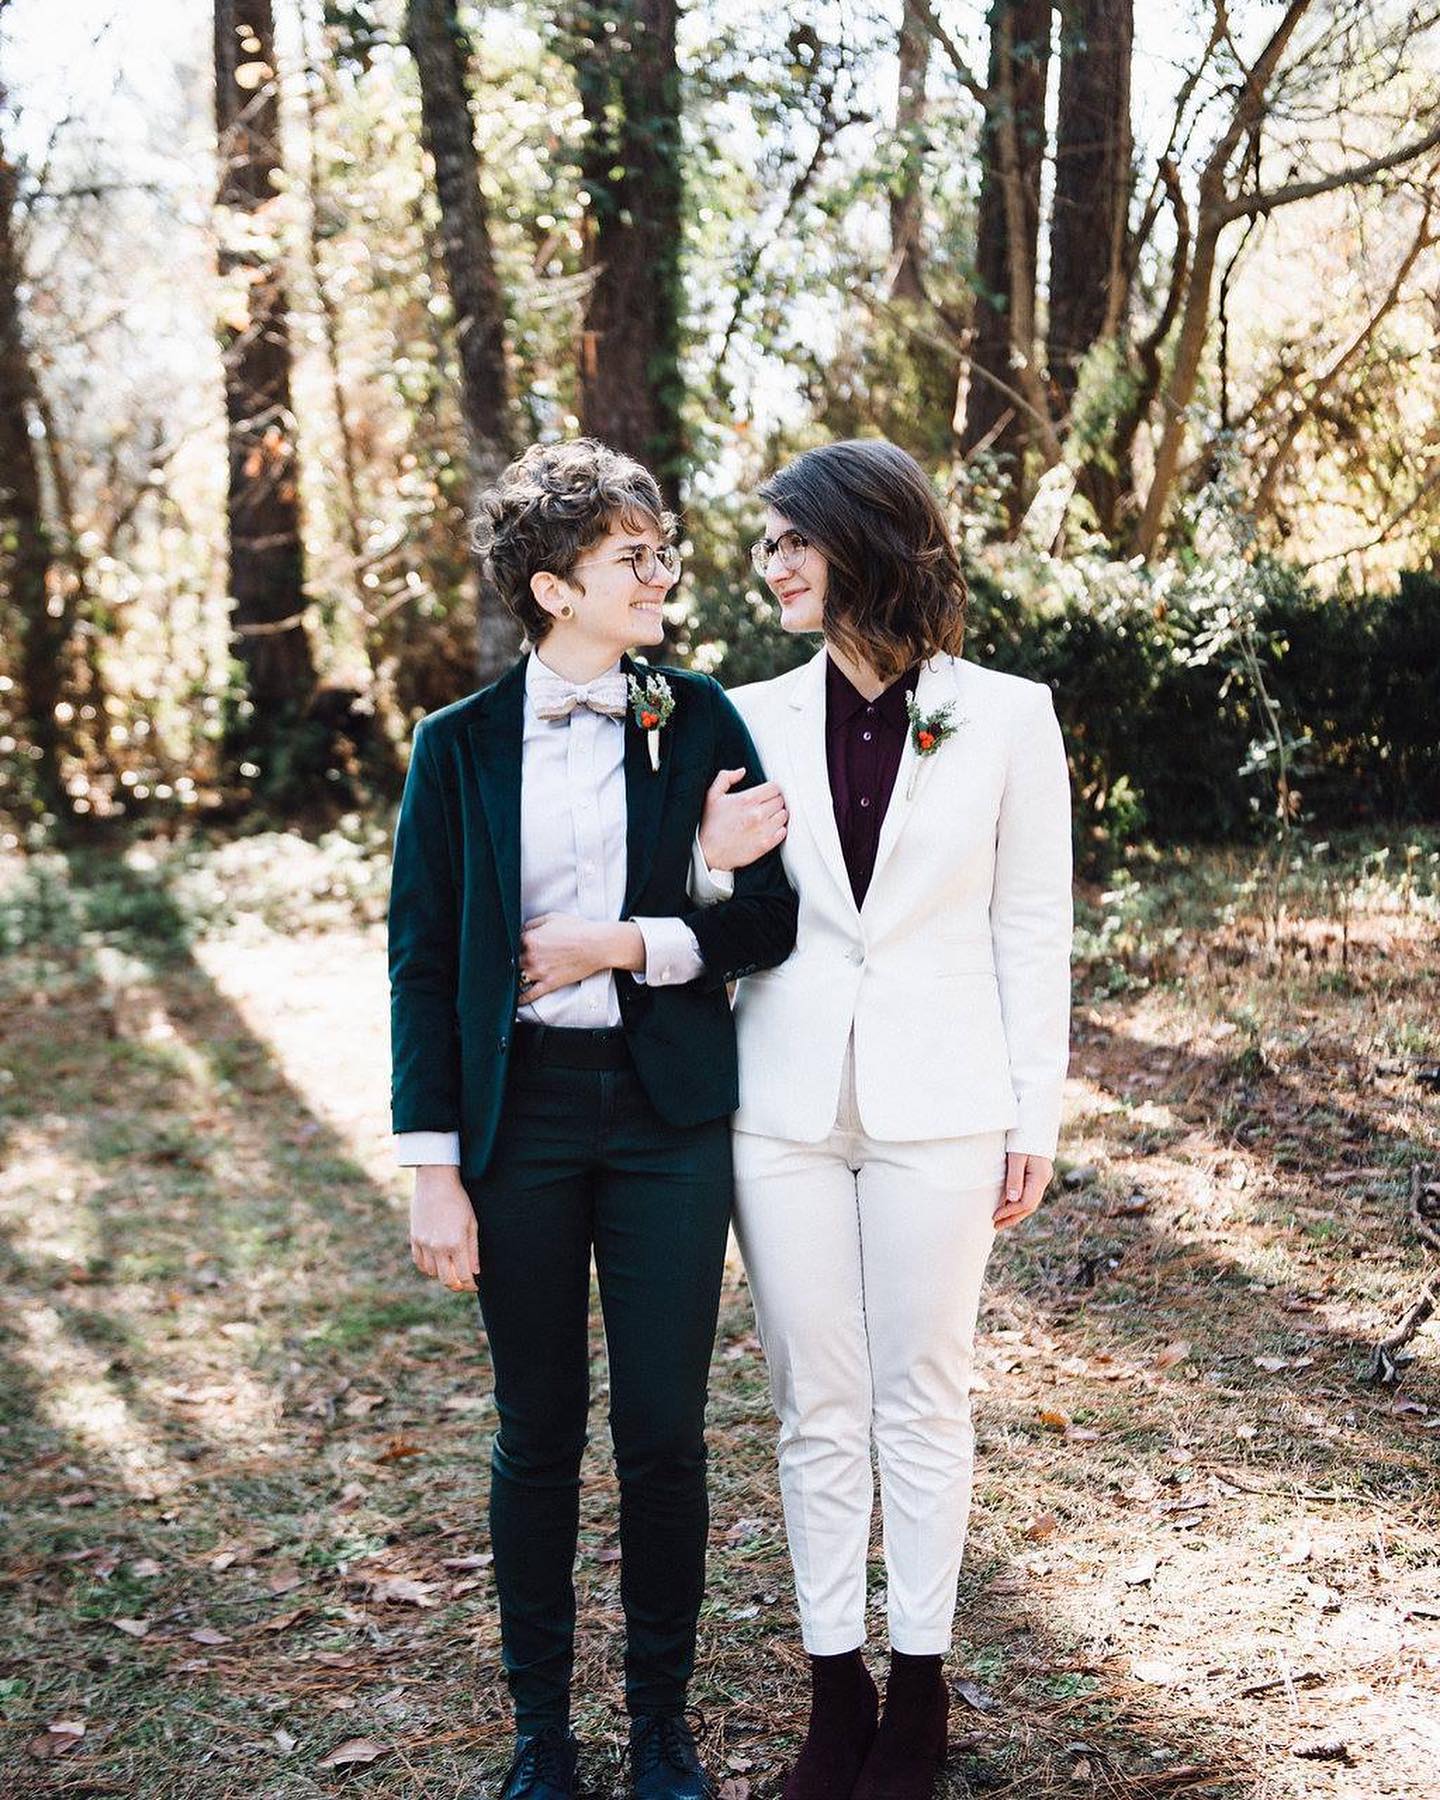 Two women in suits standing in a wooded area near a bridal salon.